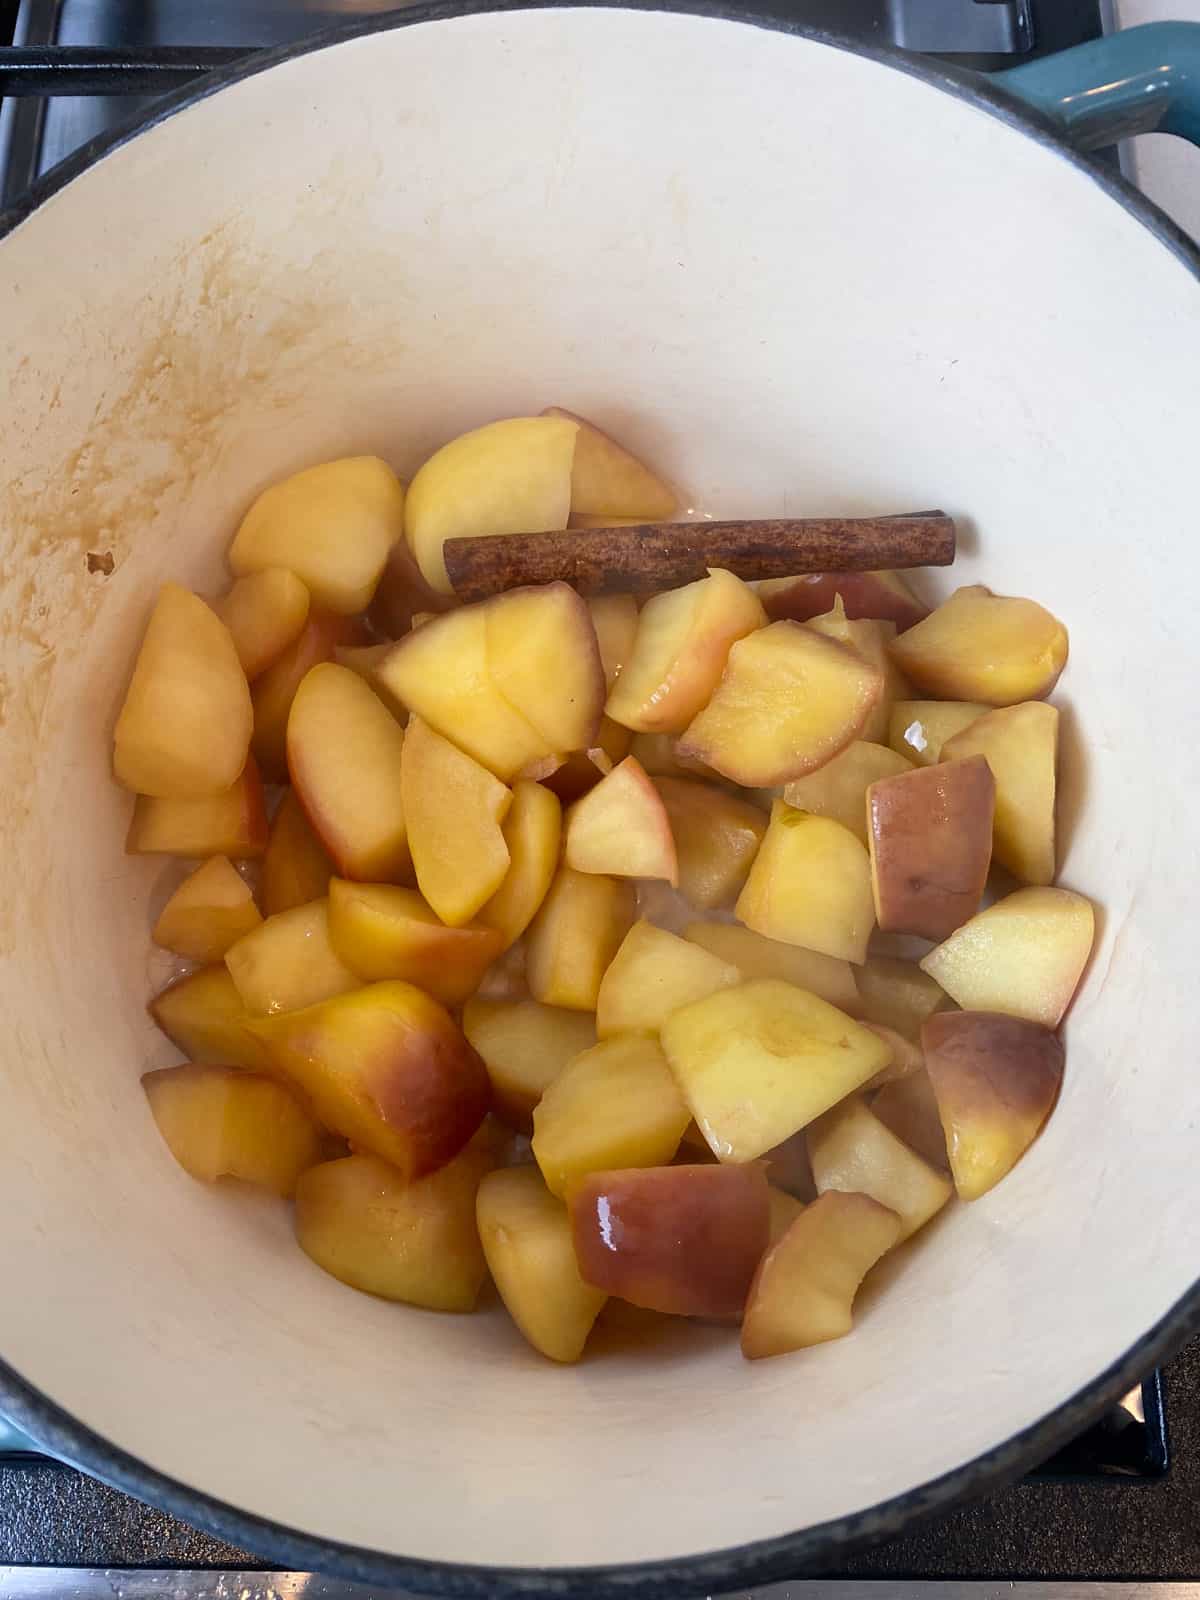 Cook the chopped apples and cinnamon until the apples are very soft.